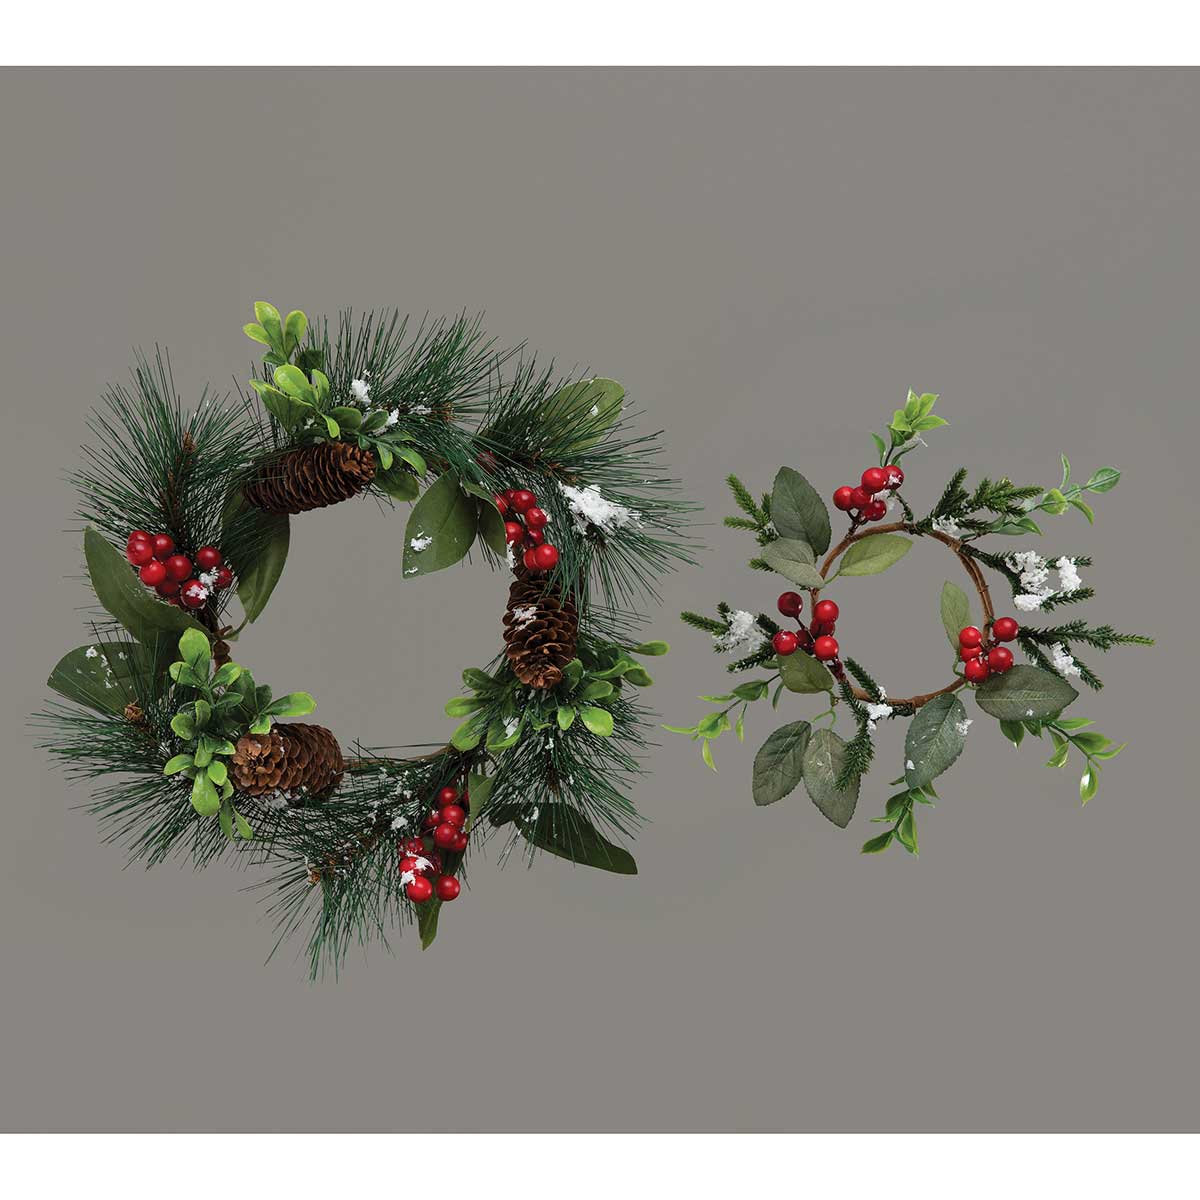 MINI WREATH CHALET CMAS PINE 14IN - Click Image to Close